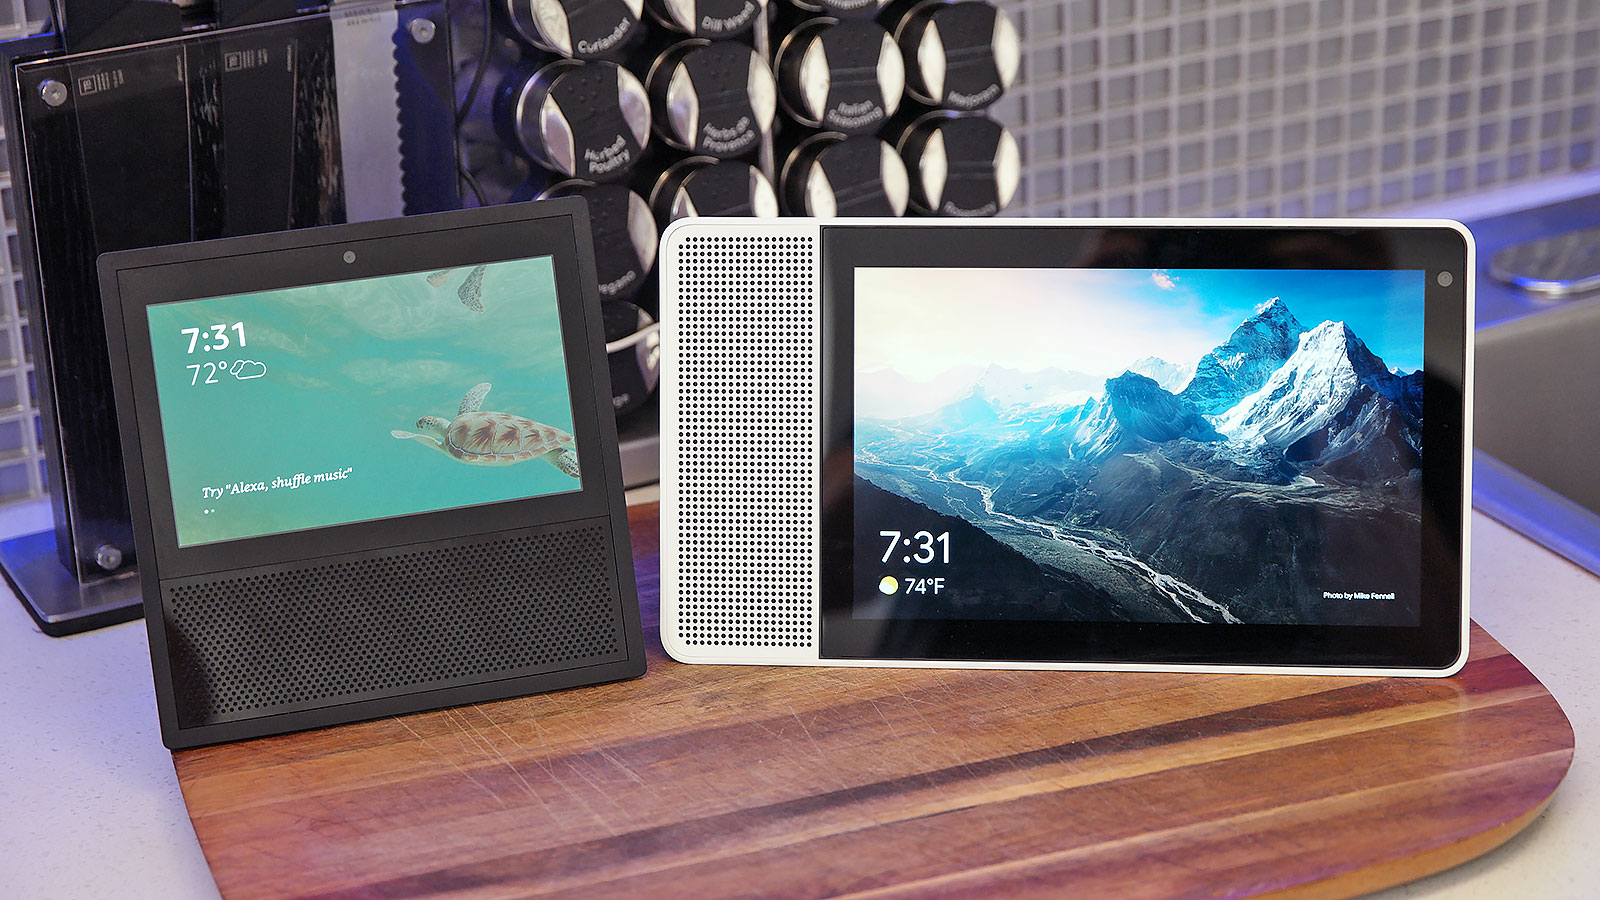 Google And Lenovo’s Smart Display Trounces Amazon’s In Every Way